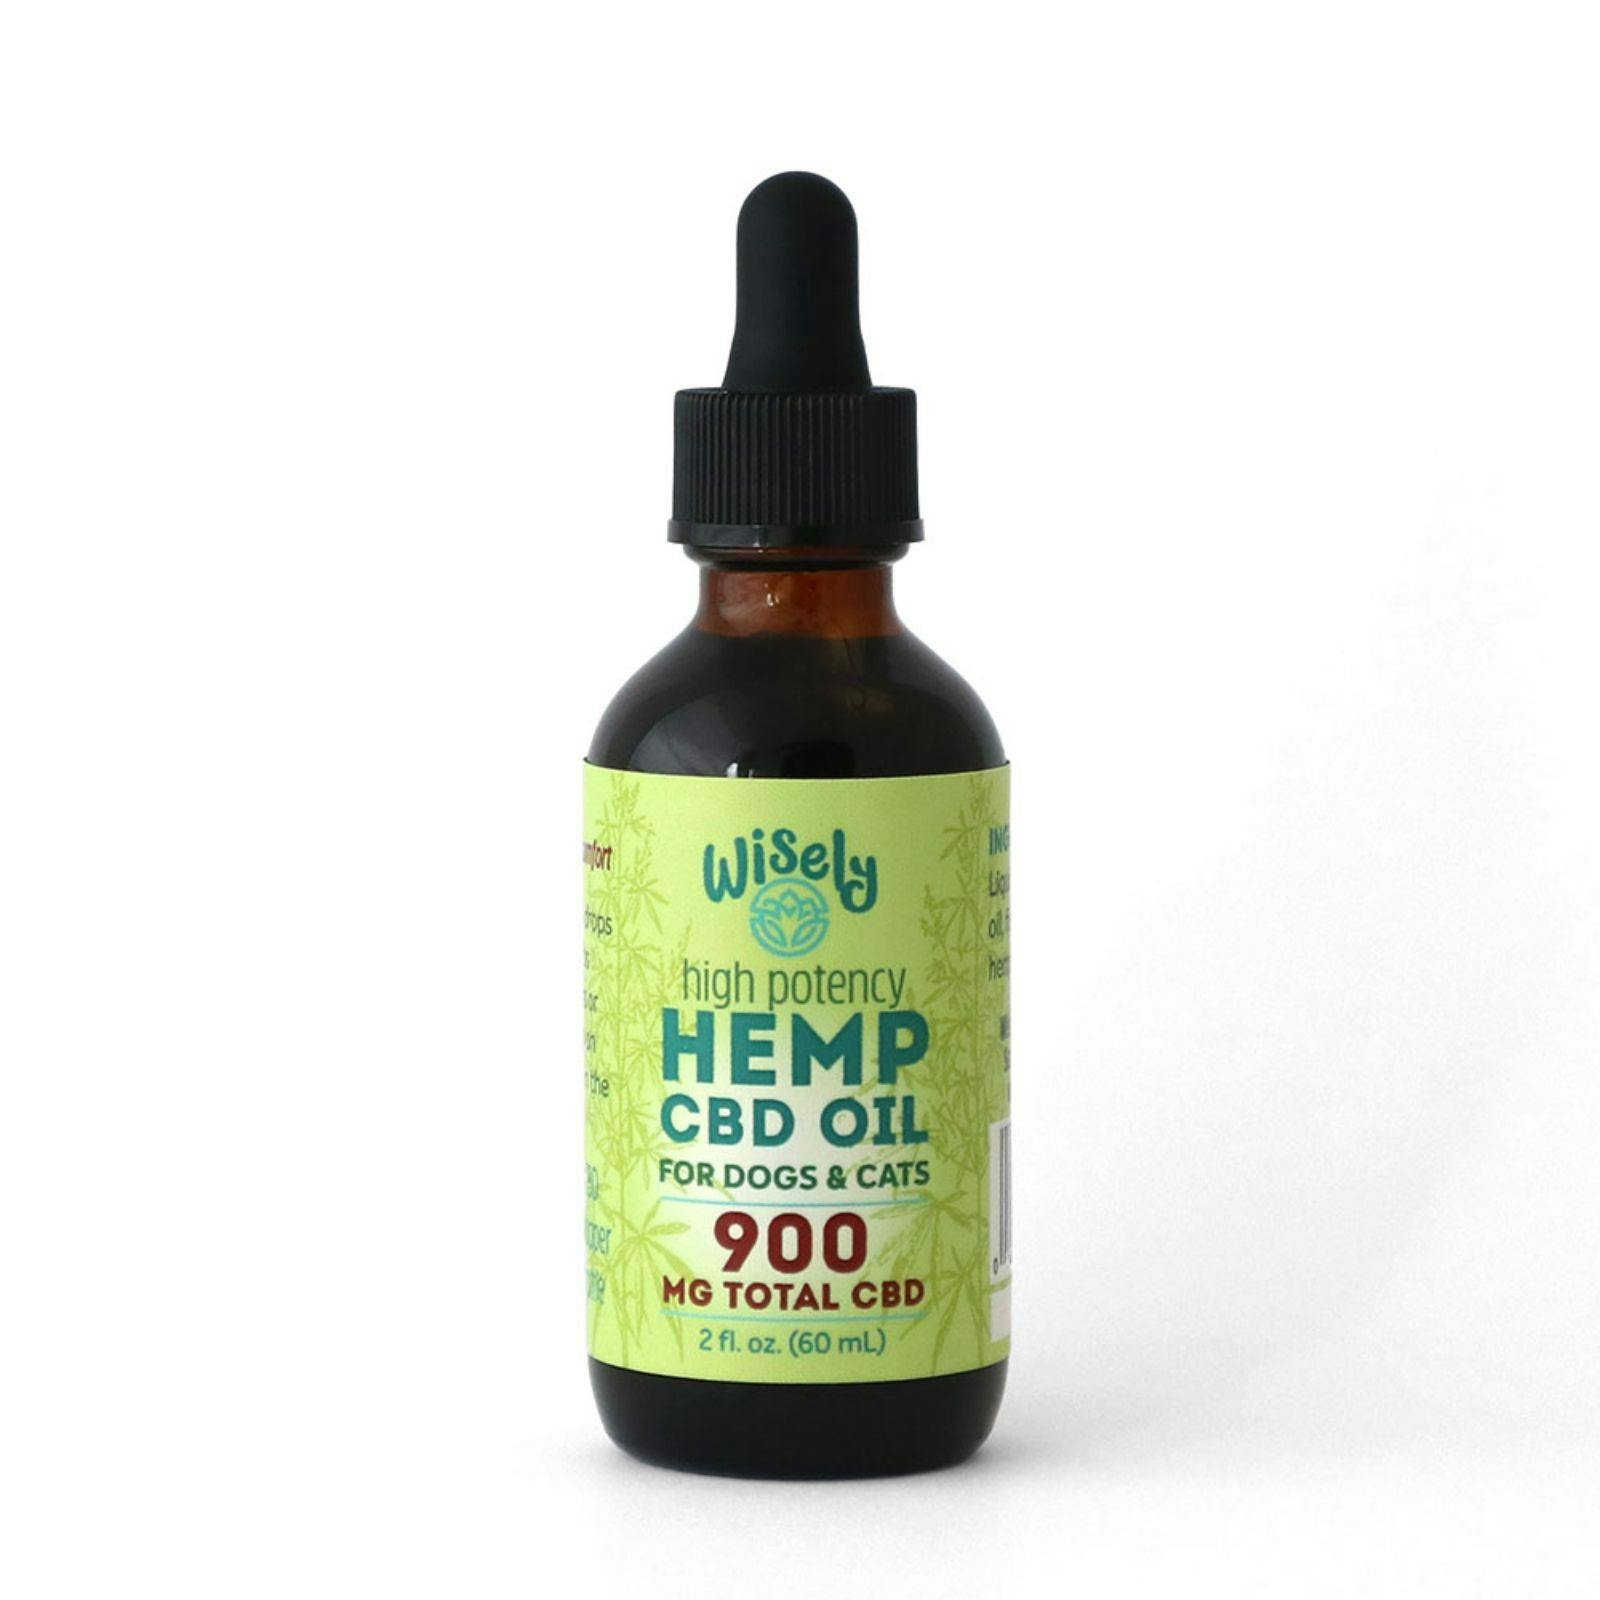 Wisely cbd for dogs